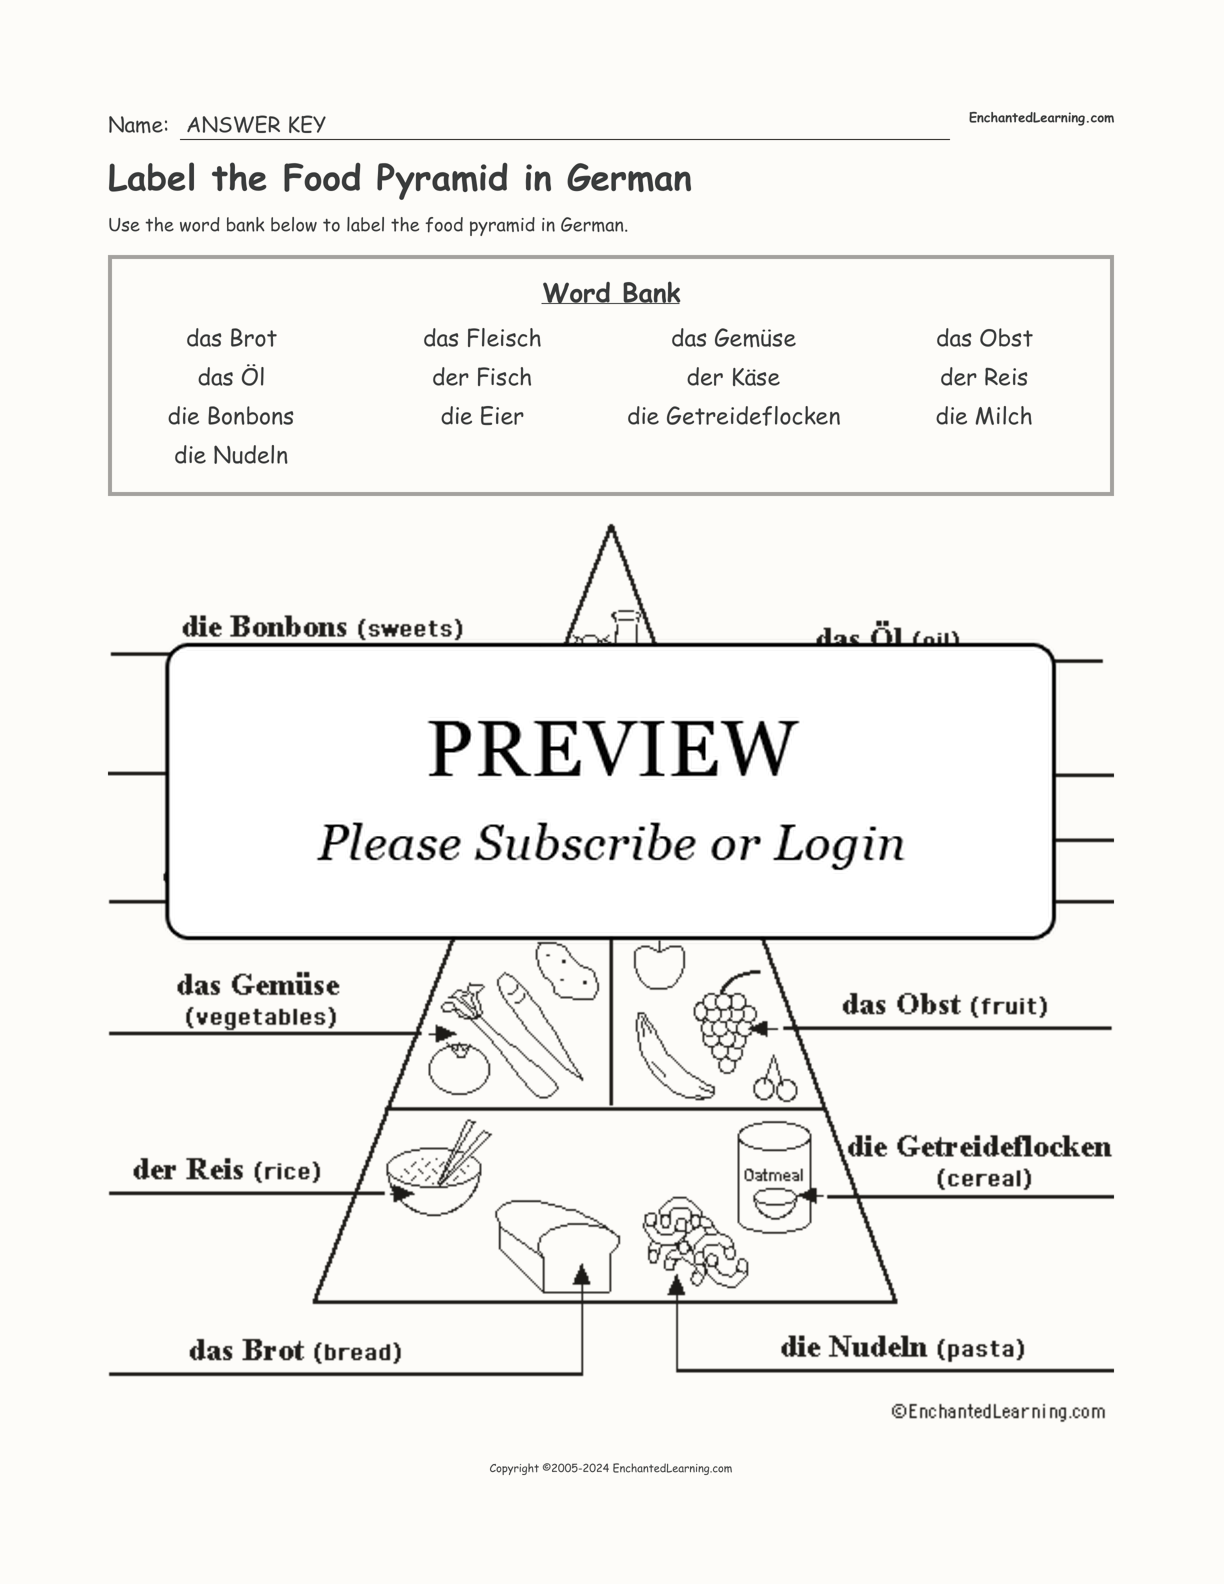 Label the Food Pyramid in German interactive worksheet page 2